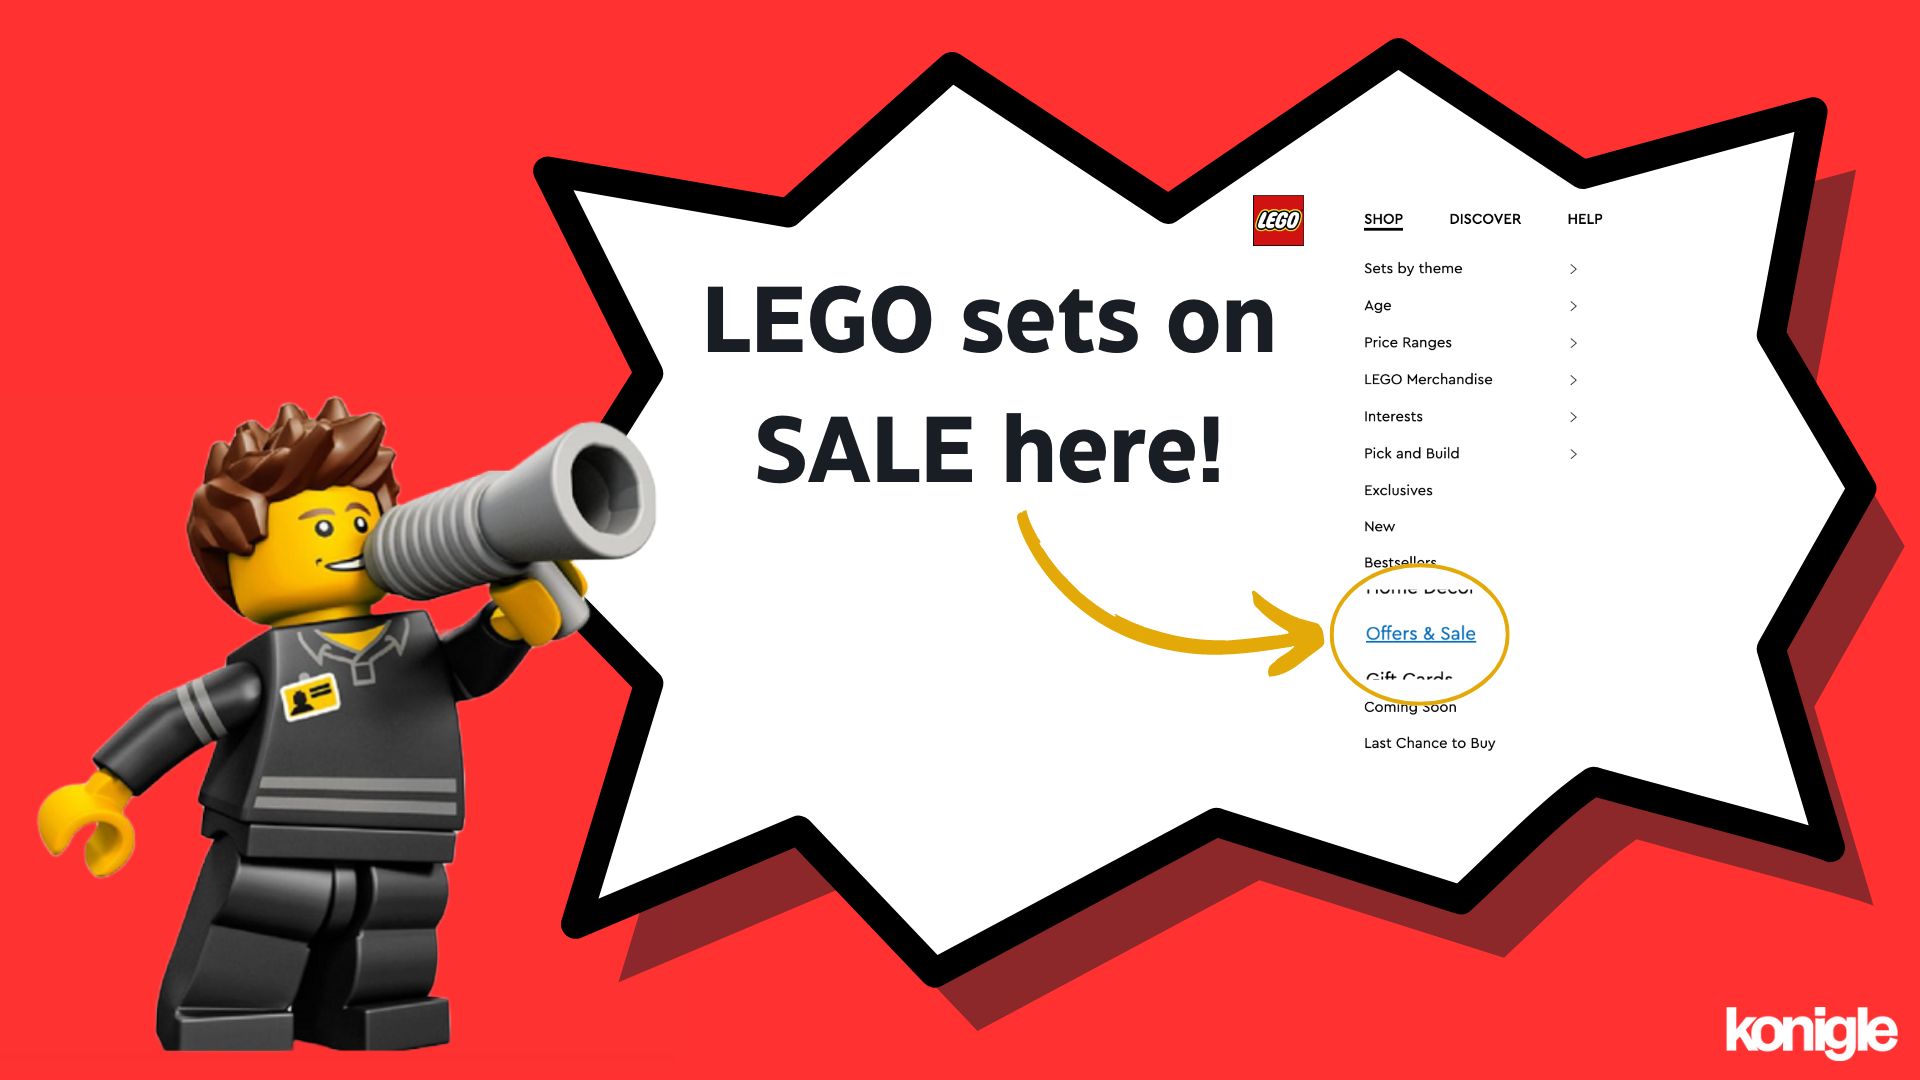 This is how having a sales collection boosts revenue for LEGO